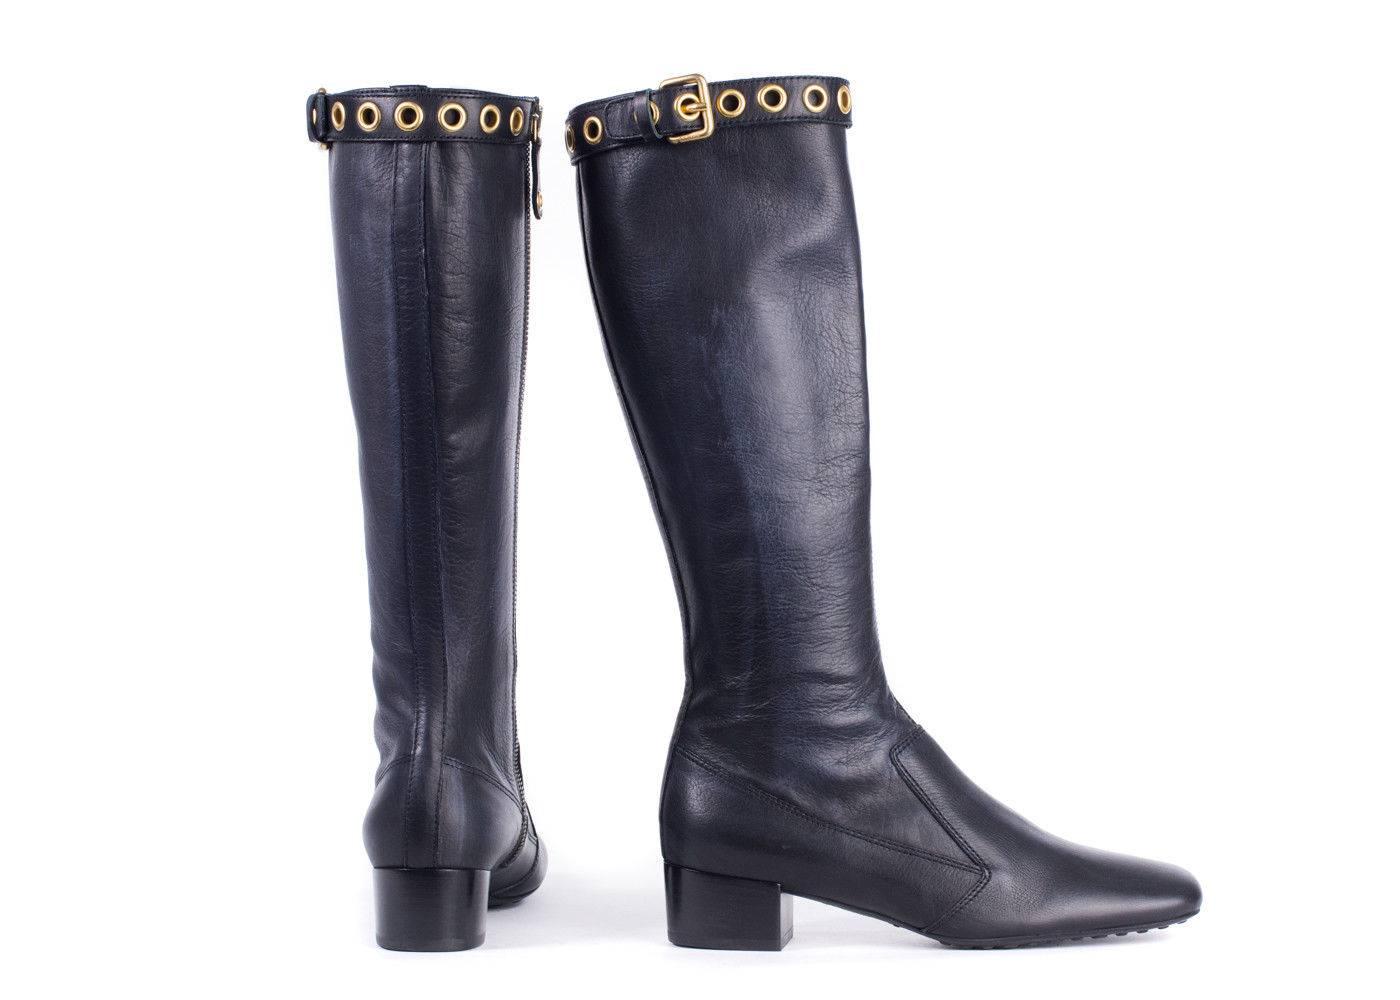 Women's or Men's Car Shoe Women's Black Leather Gold Buckle Tall Boots